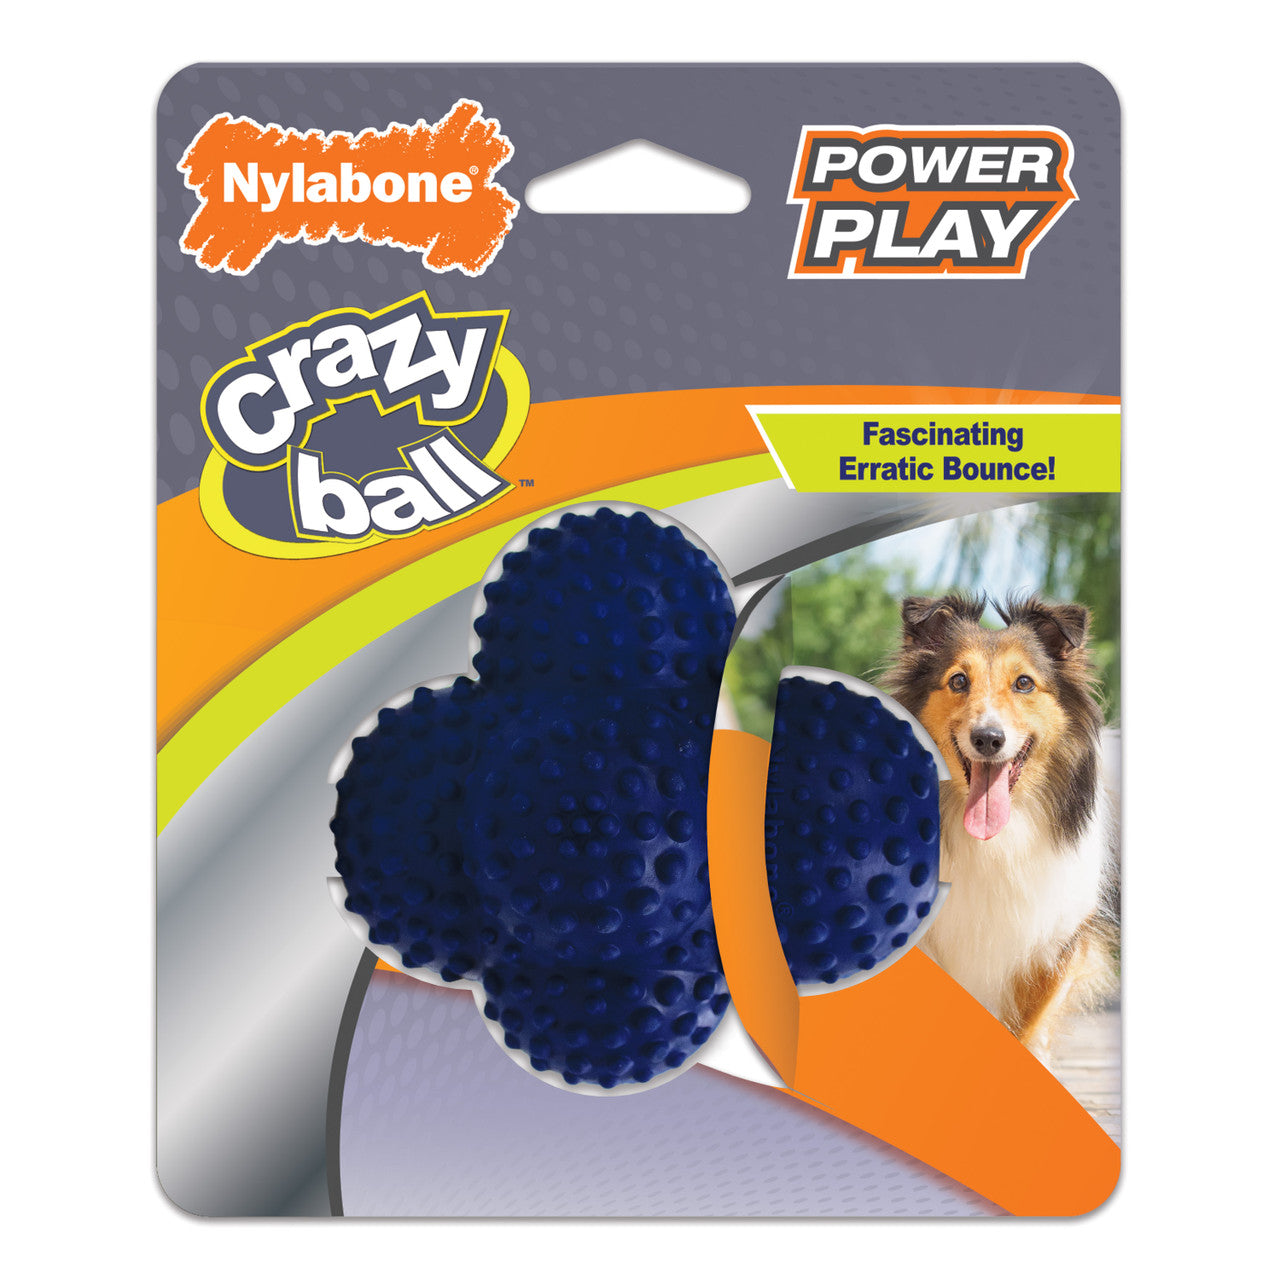 Nylabone Power Play Ball for Dogs Crazy Ball Large (1 Count)